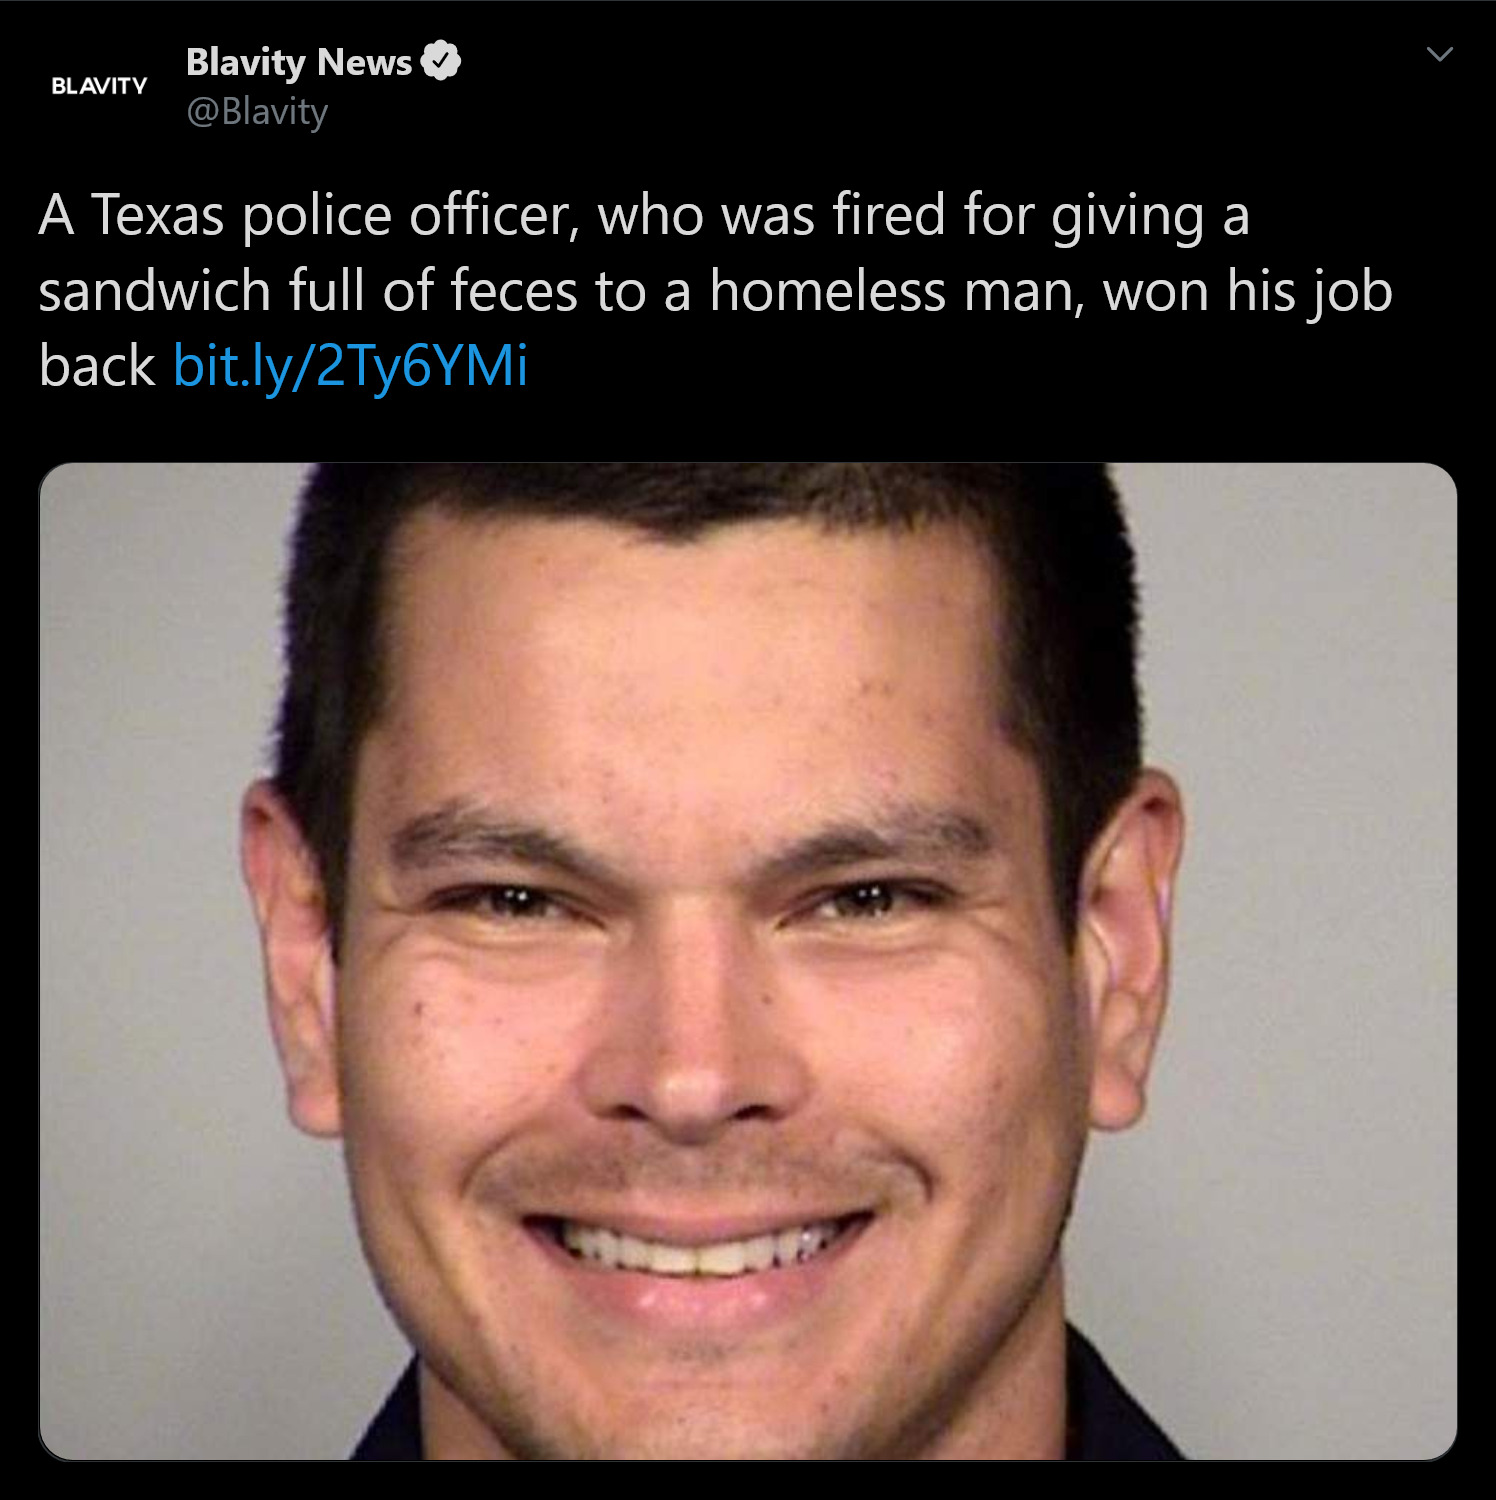 matthew luckhurst - Blavity Blavity News A Texas police officer, who was fired for giving a sandwich full of feces to a homeless man, won his job back bit.ly2Ty6YMI